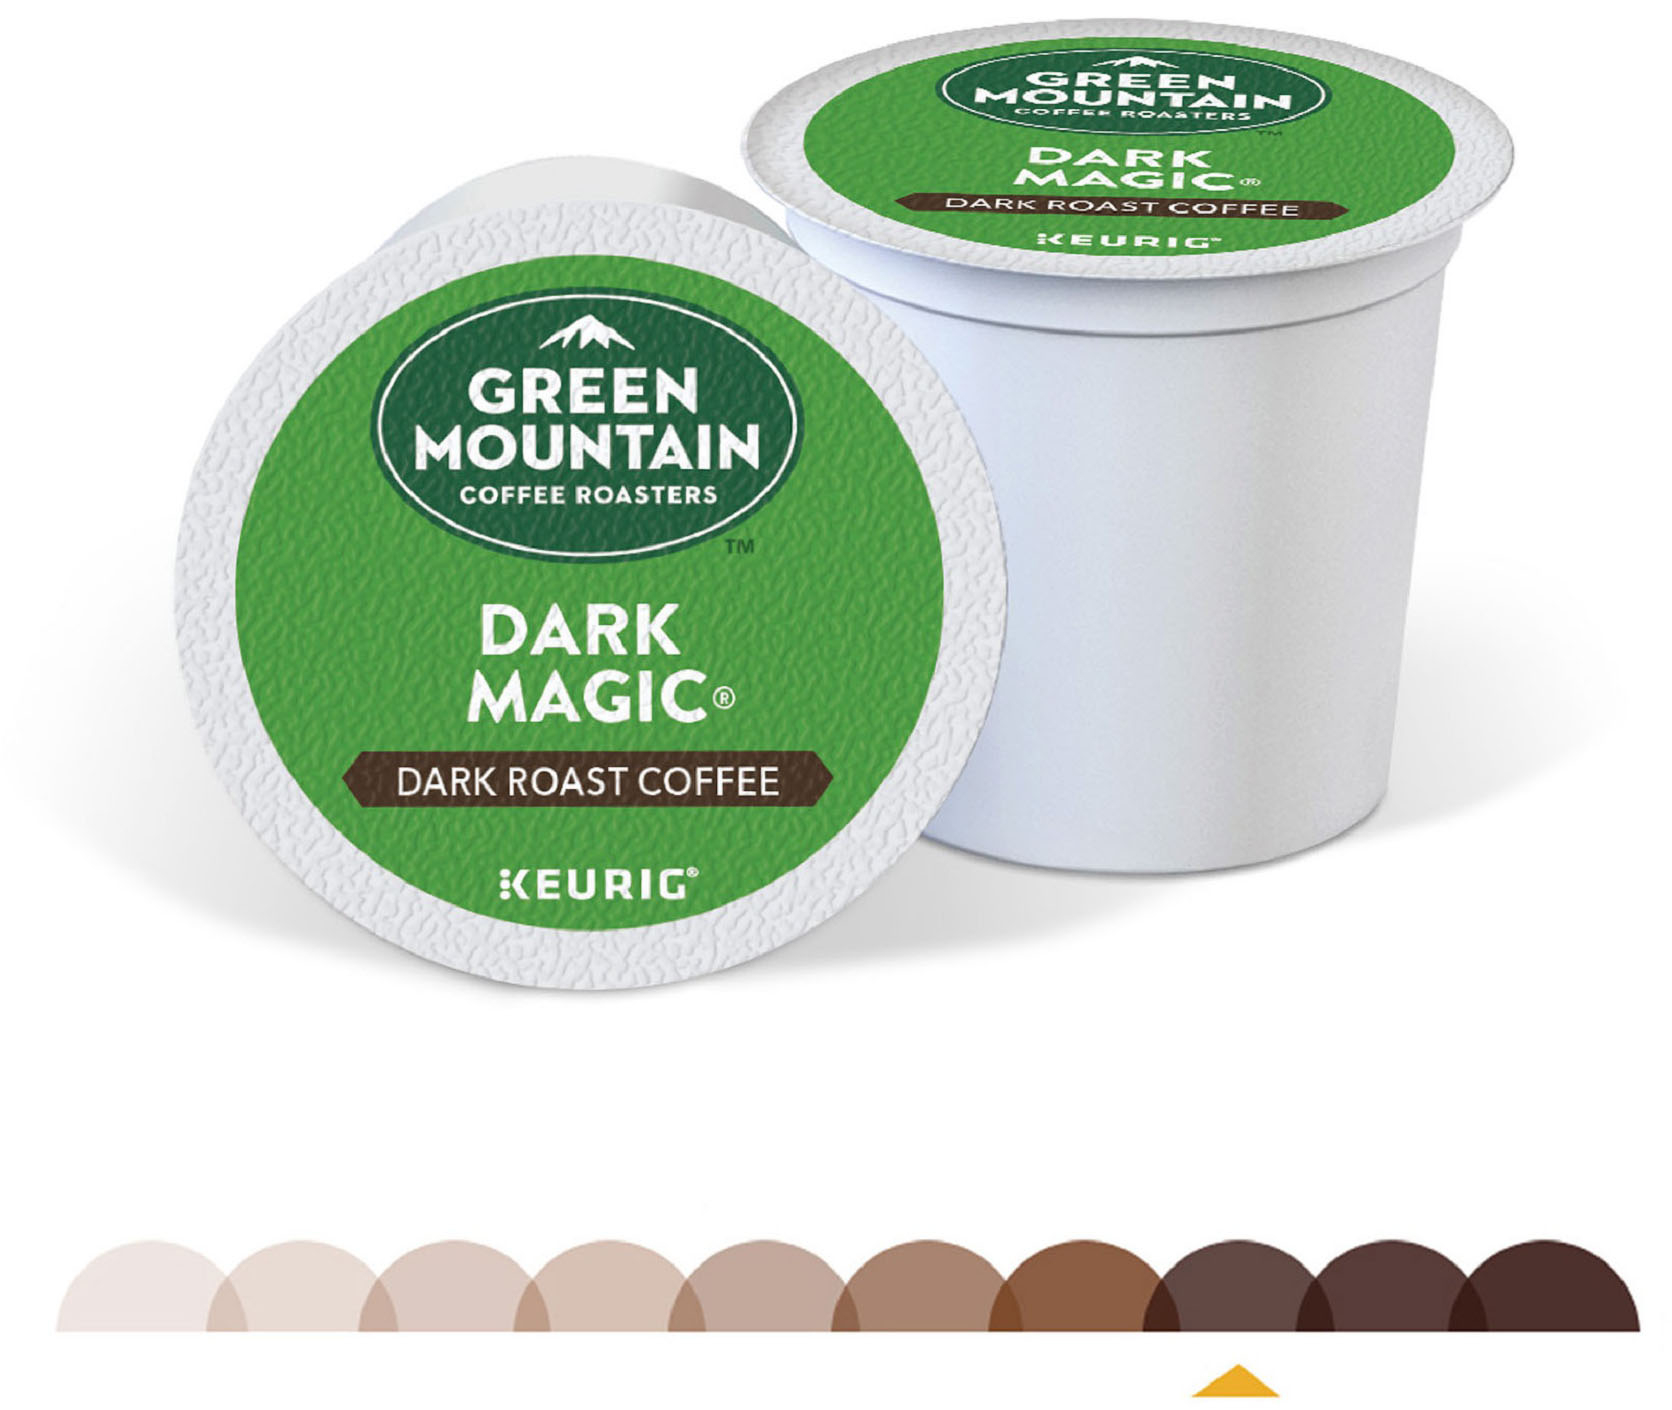 Left View: Green Mountain Coffee Dark Magic K-Cup Pods, Dark Roast, 96 Count for Keurig Brewers (2 Boxes of 48 K-Cups) (2 pack)